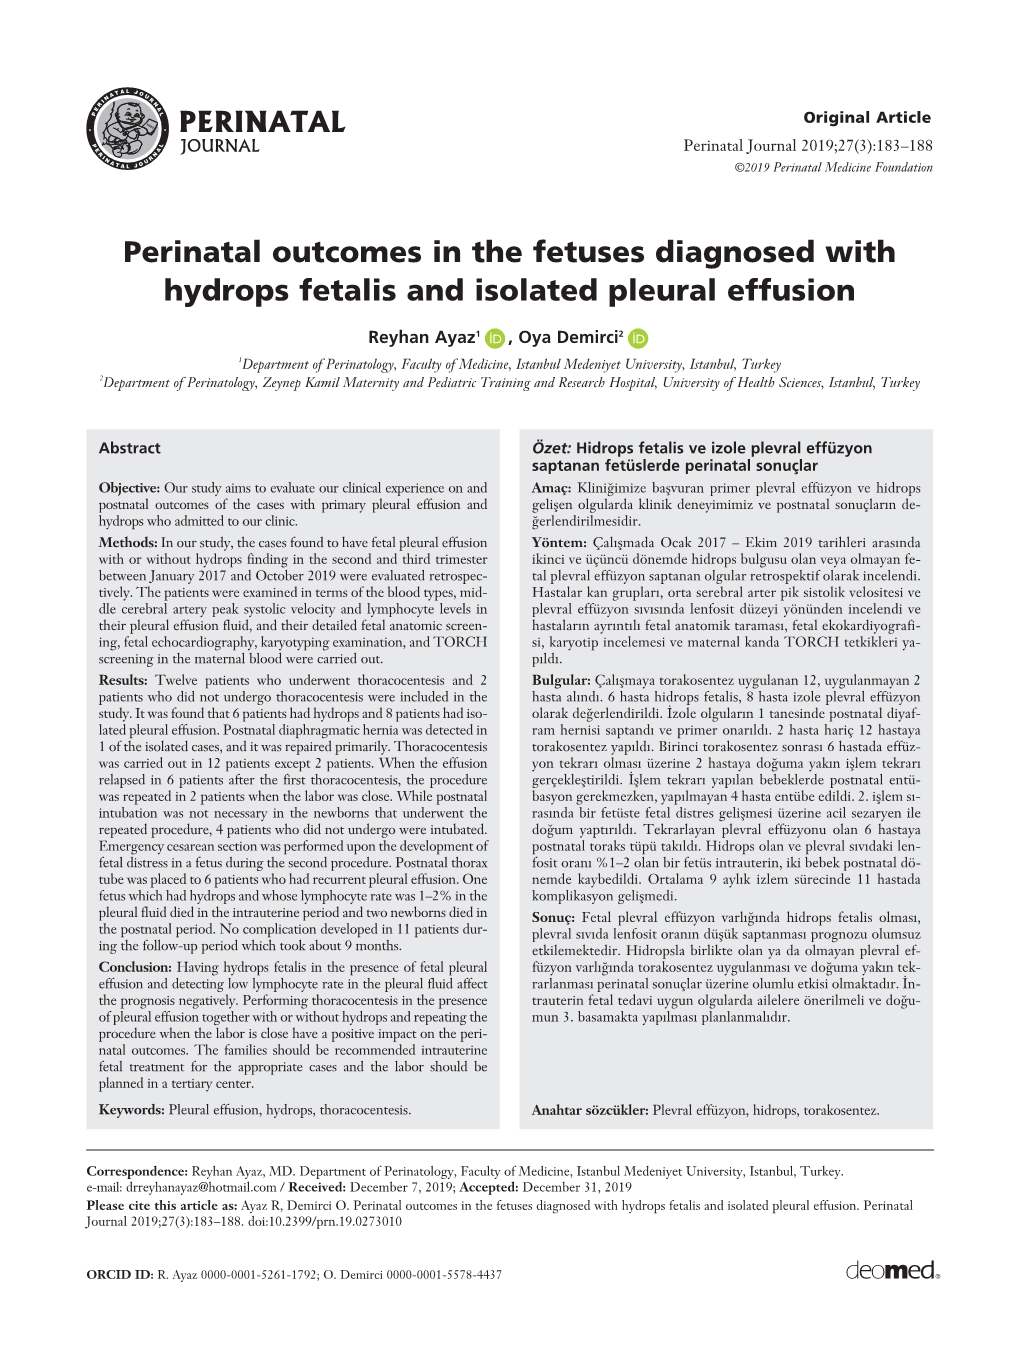 Perinatal Outcomes in the Fetuses Diagnosed with Hydrops Fetalis and Isolated Pleural Effusion